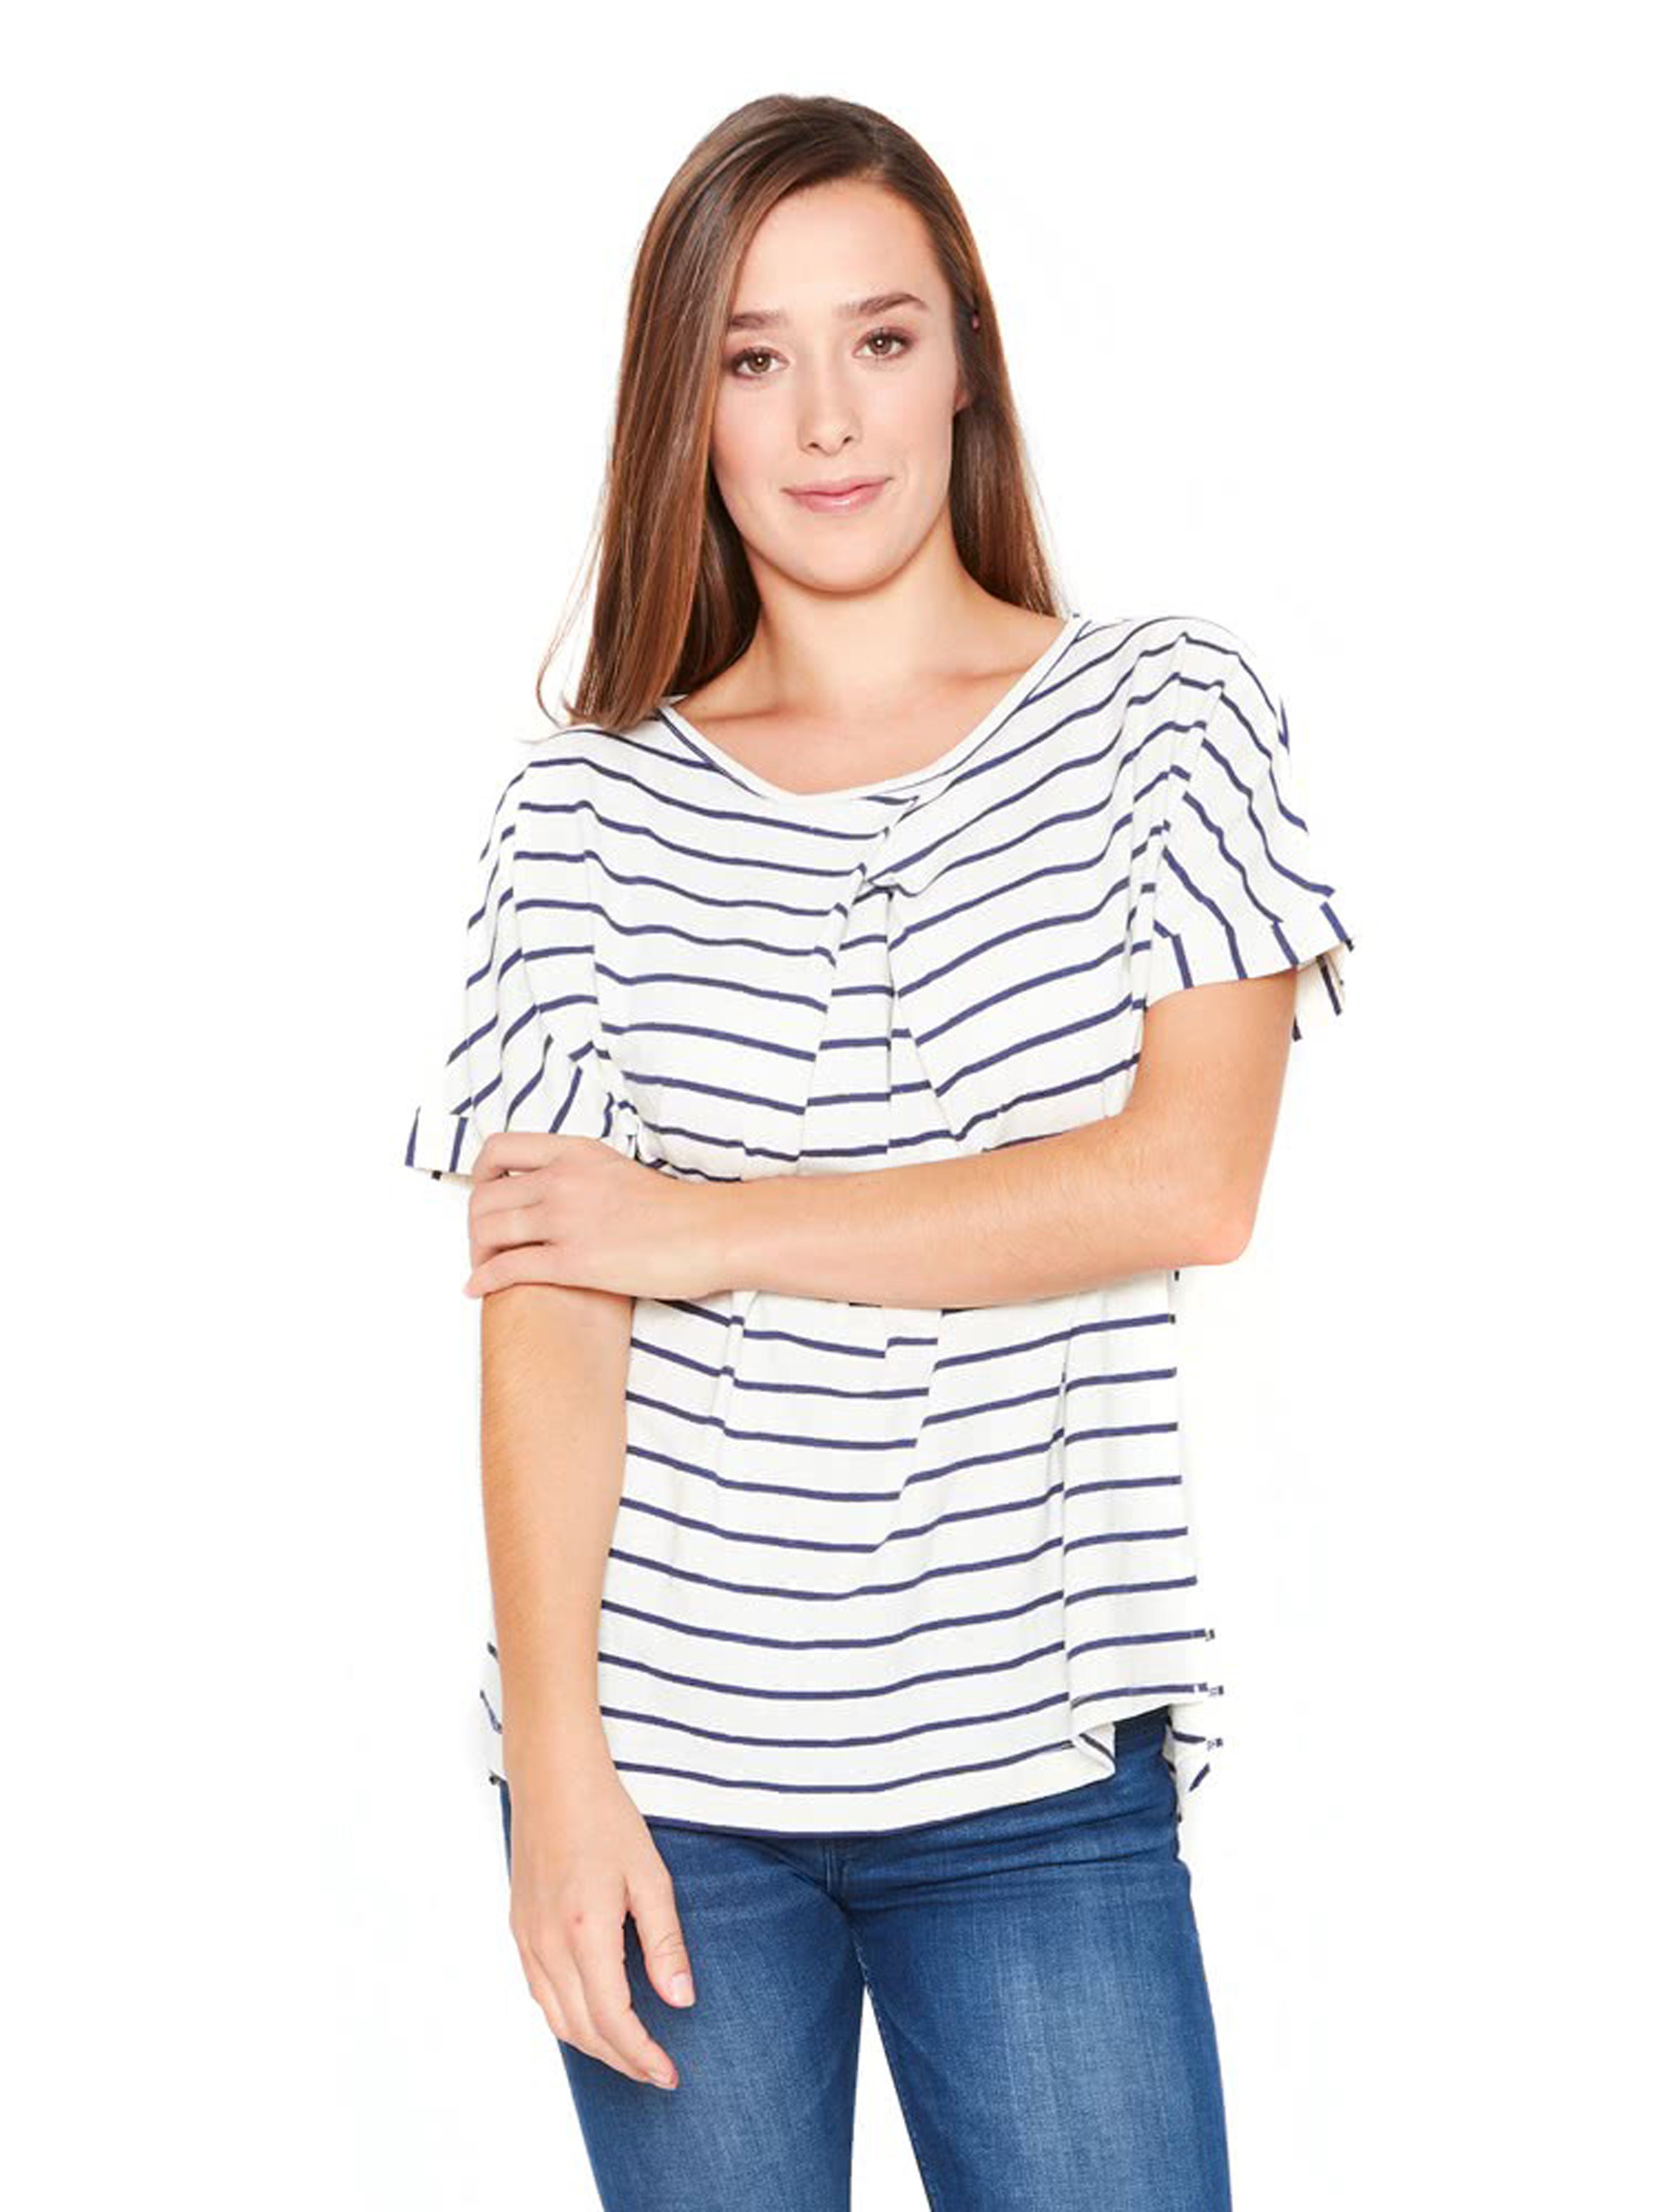 Modern T-shirt with a Bordered Pleat by The Hemp Line Clothing ♥ The